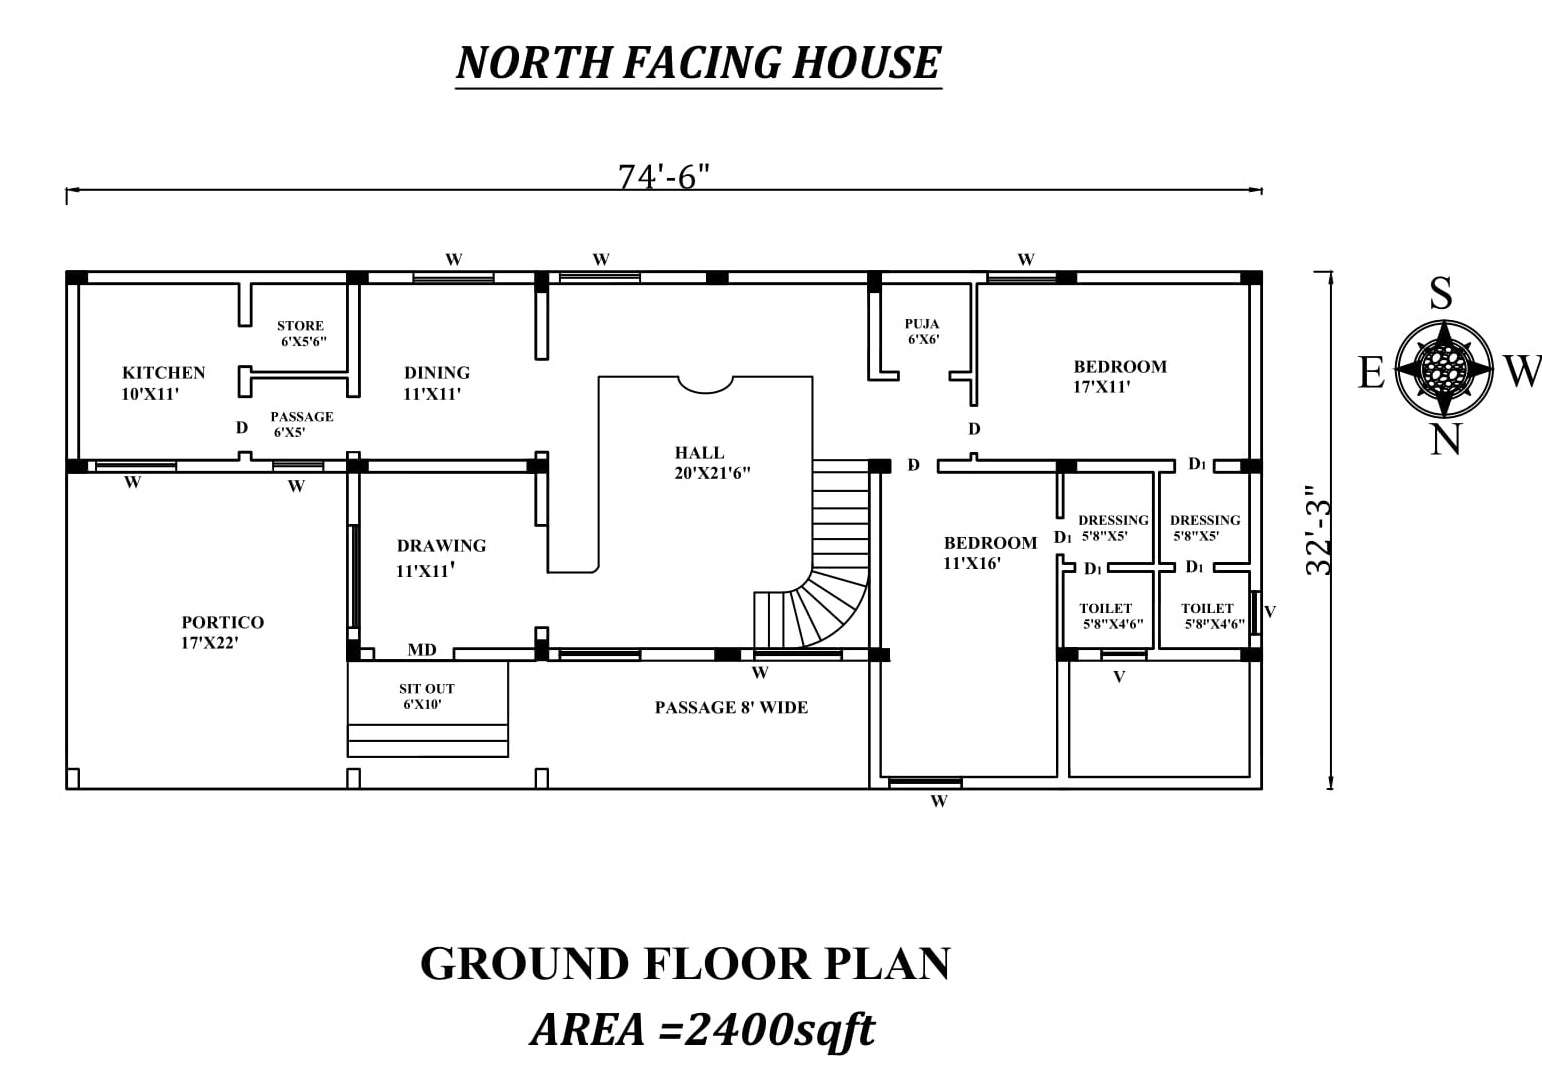 74'x32' 2bhk North facing Ground floor House Plan As Per